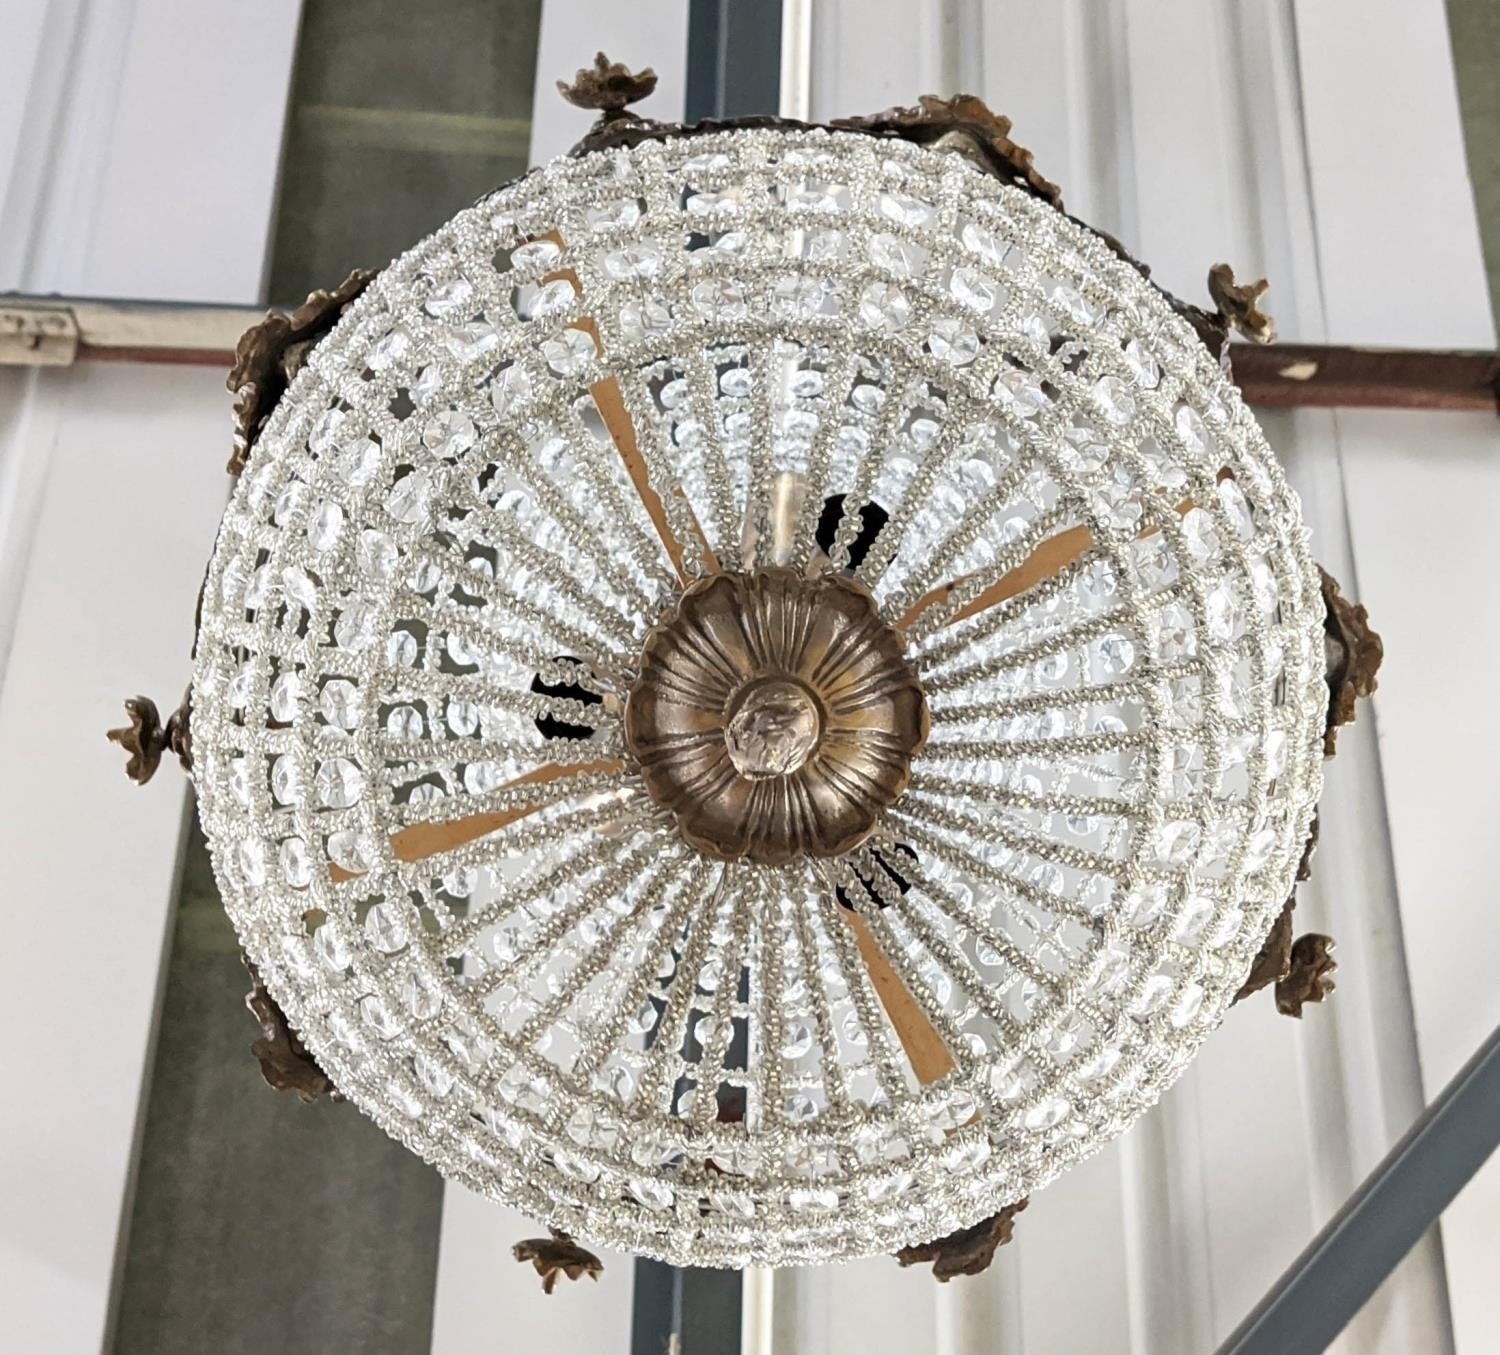 BAG CHANDELIERS, a pair, Empire style glass and gilt metal, 62cm H. (2) - Image 3 of 4